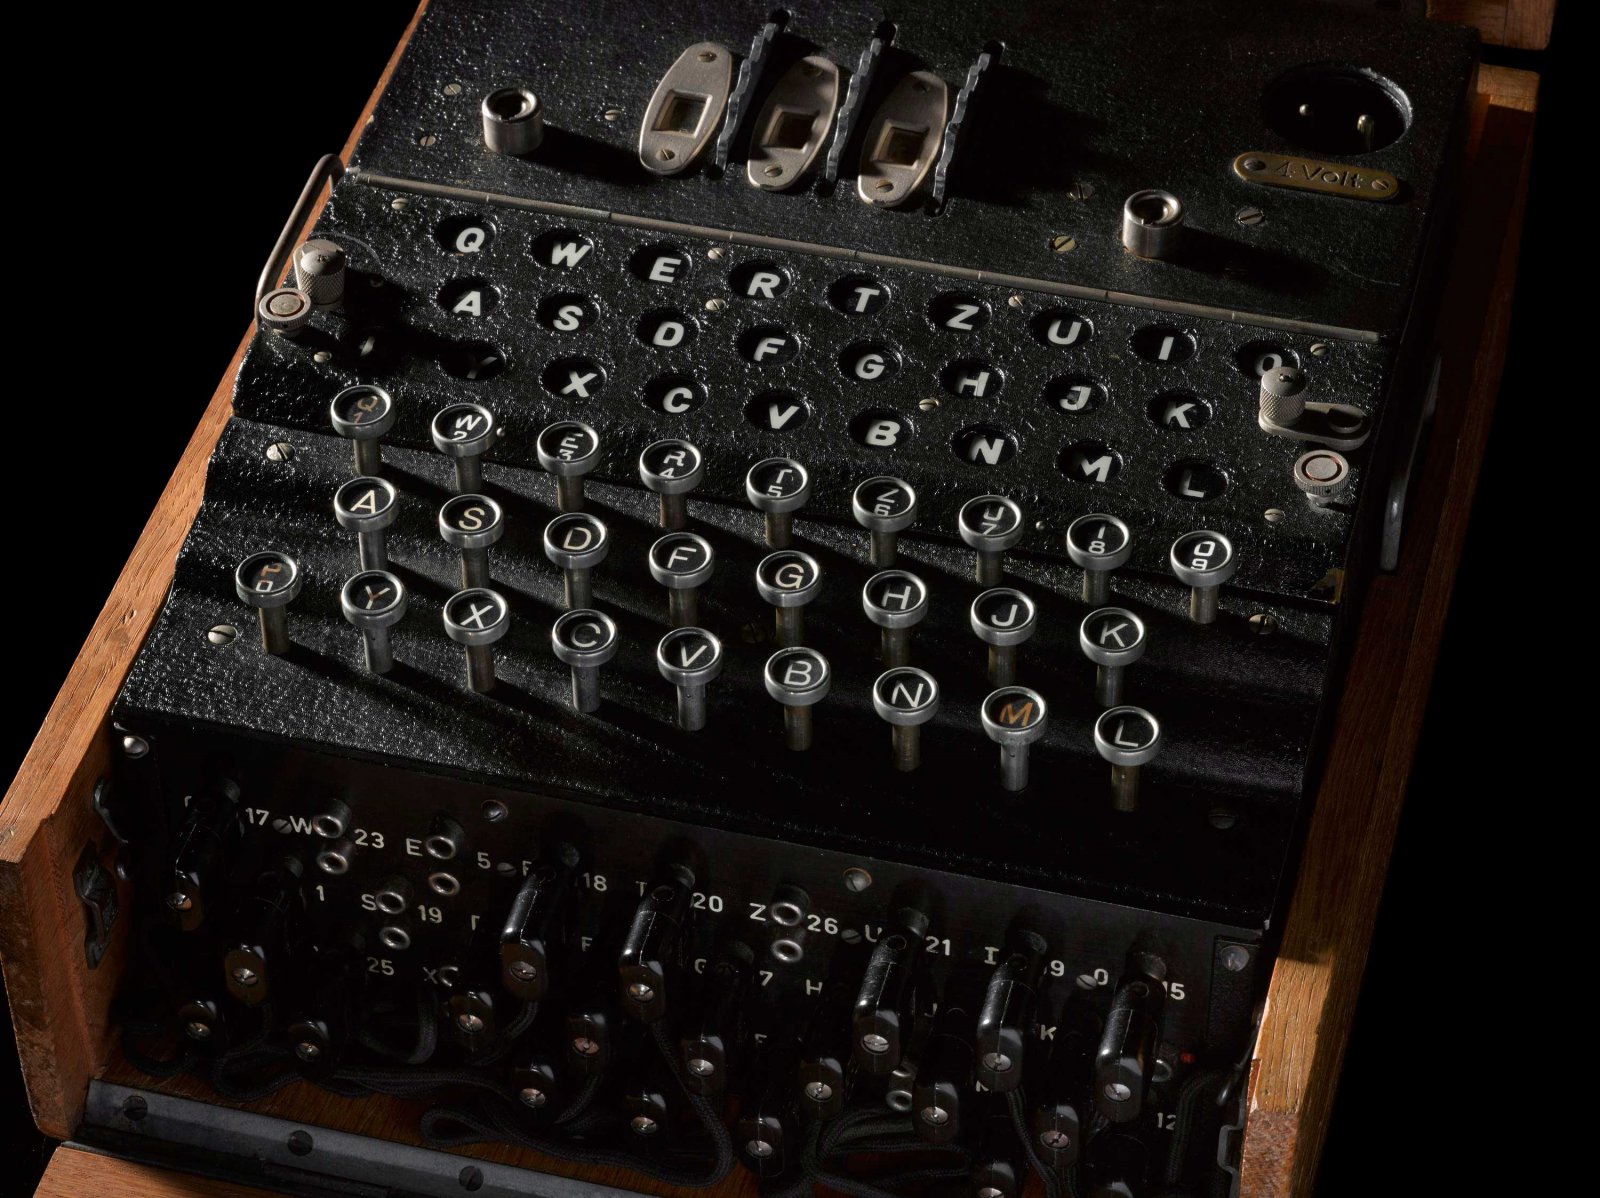 breaking-enigma-a-story-of-european-co-operation-science-museum-blog